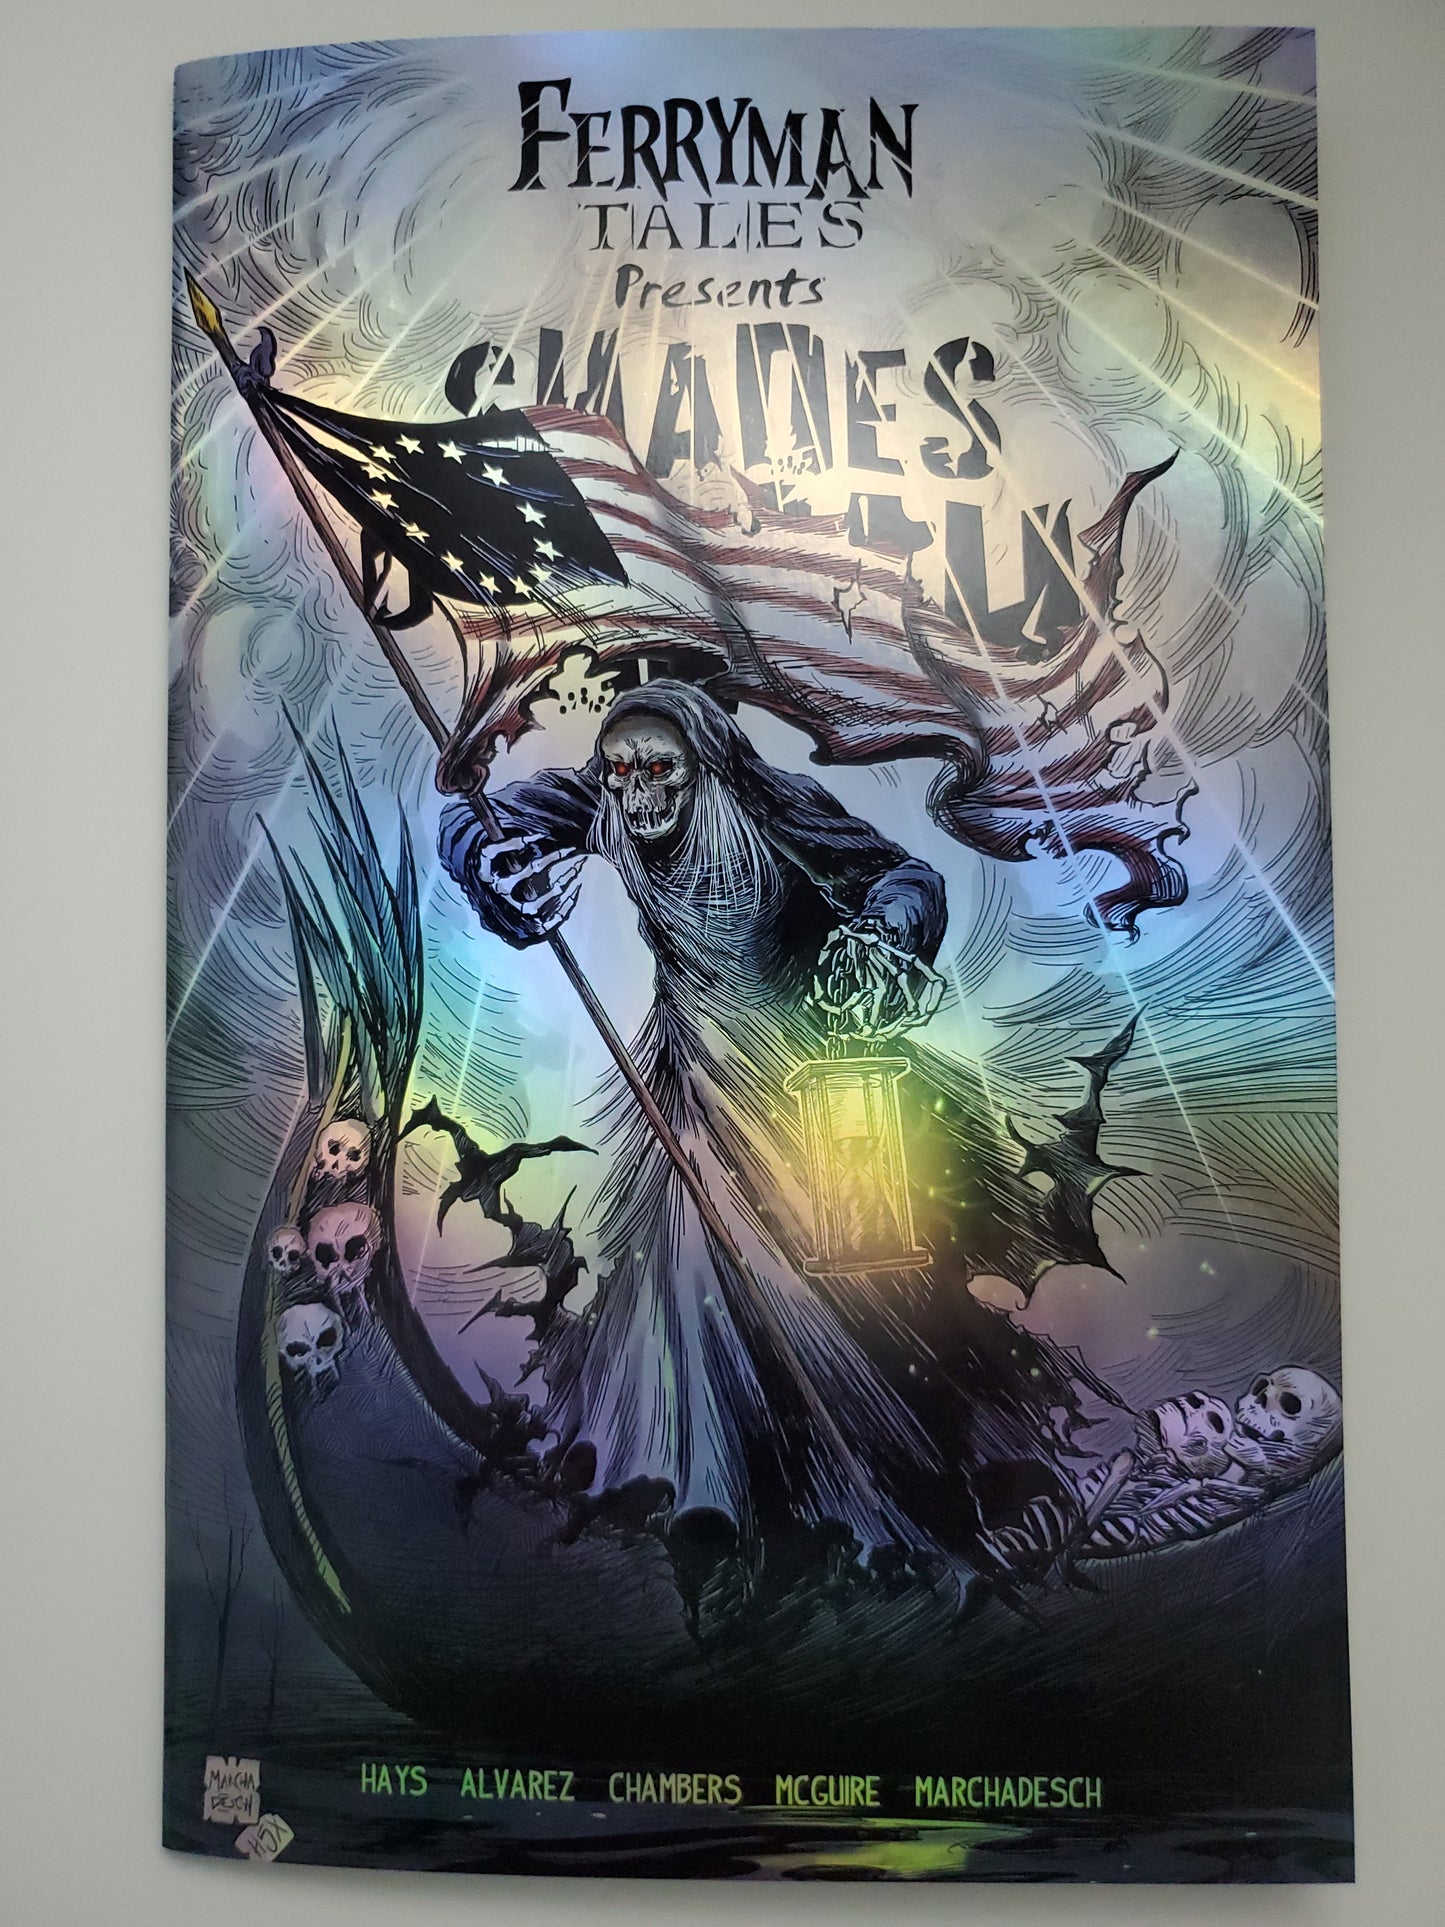 Charter Ferryman Tales Presents Shades of Death USA Excl FOIL